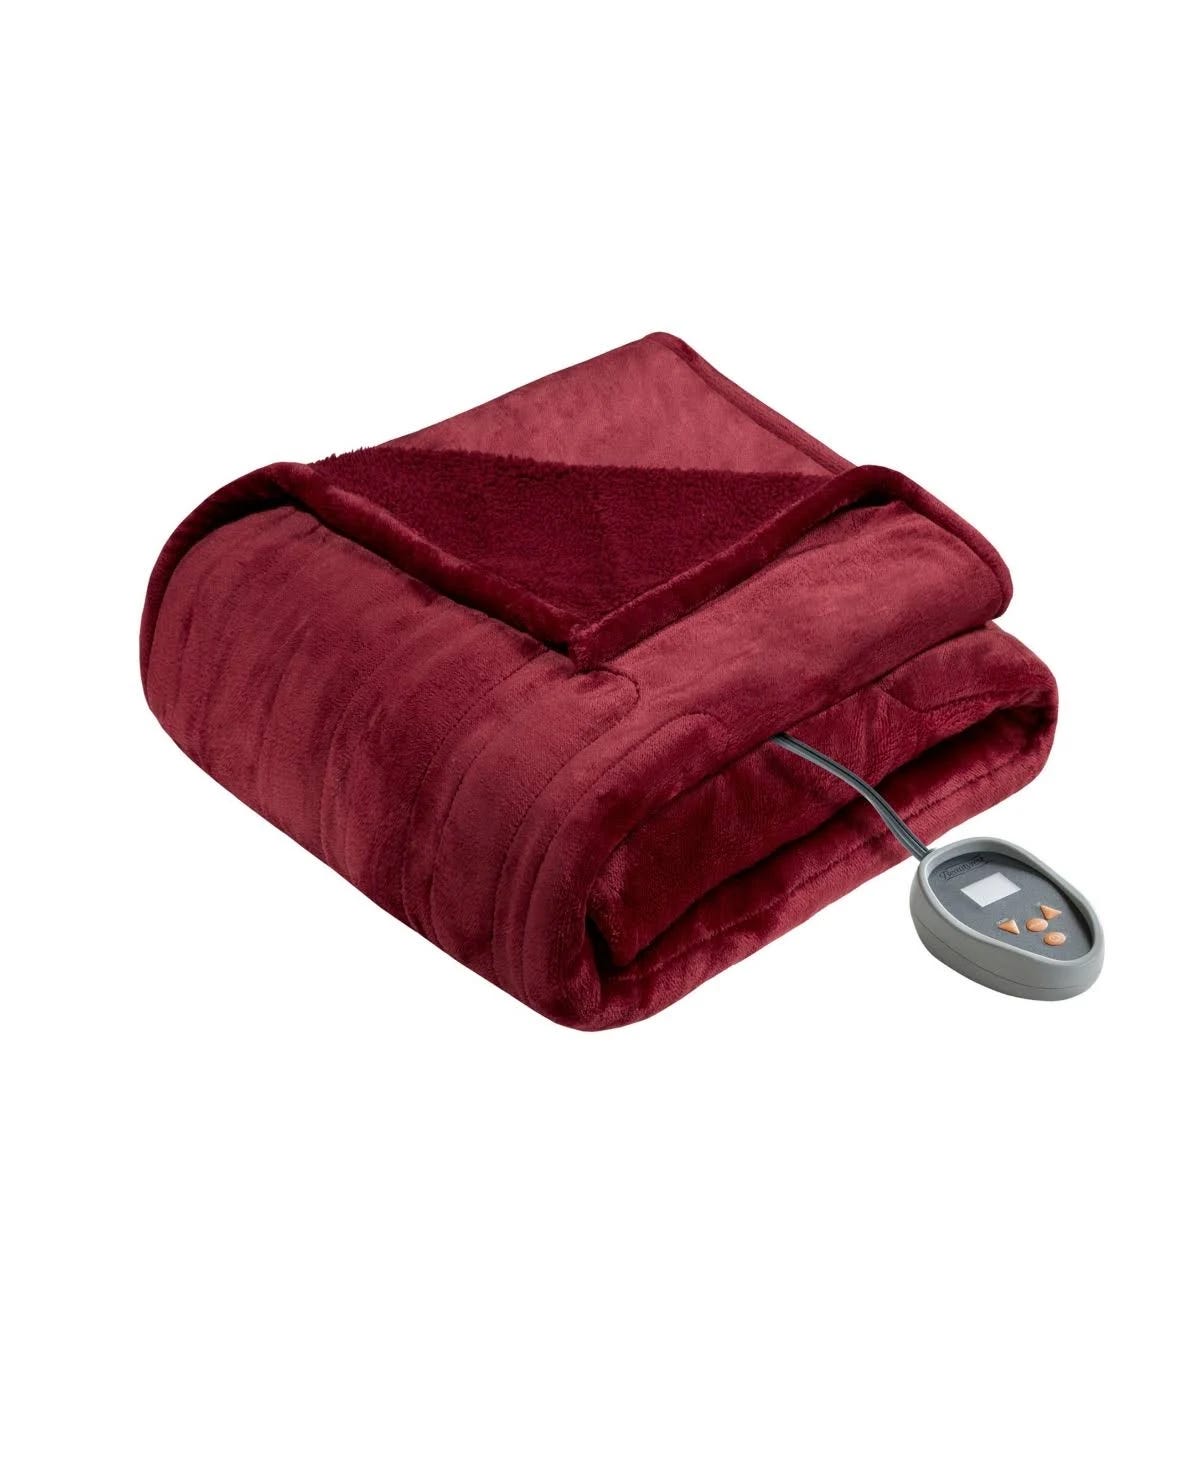 Stay Cozy with Beautyrest Electric Heated Blanket | Image